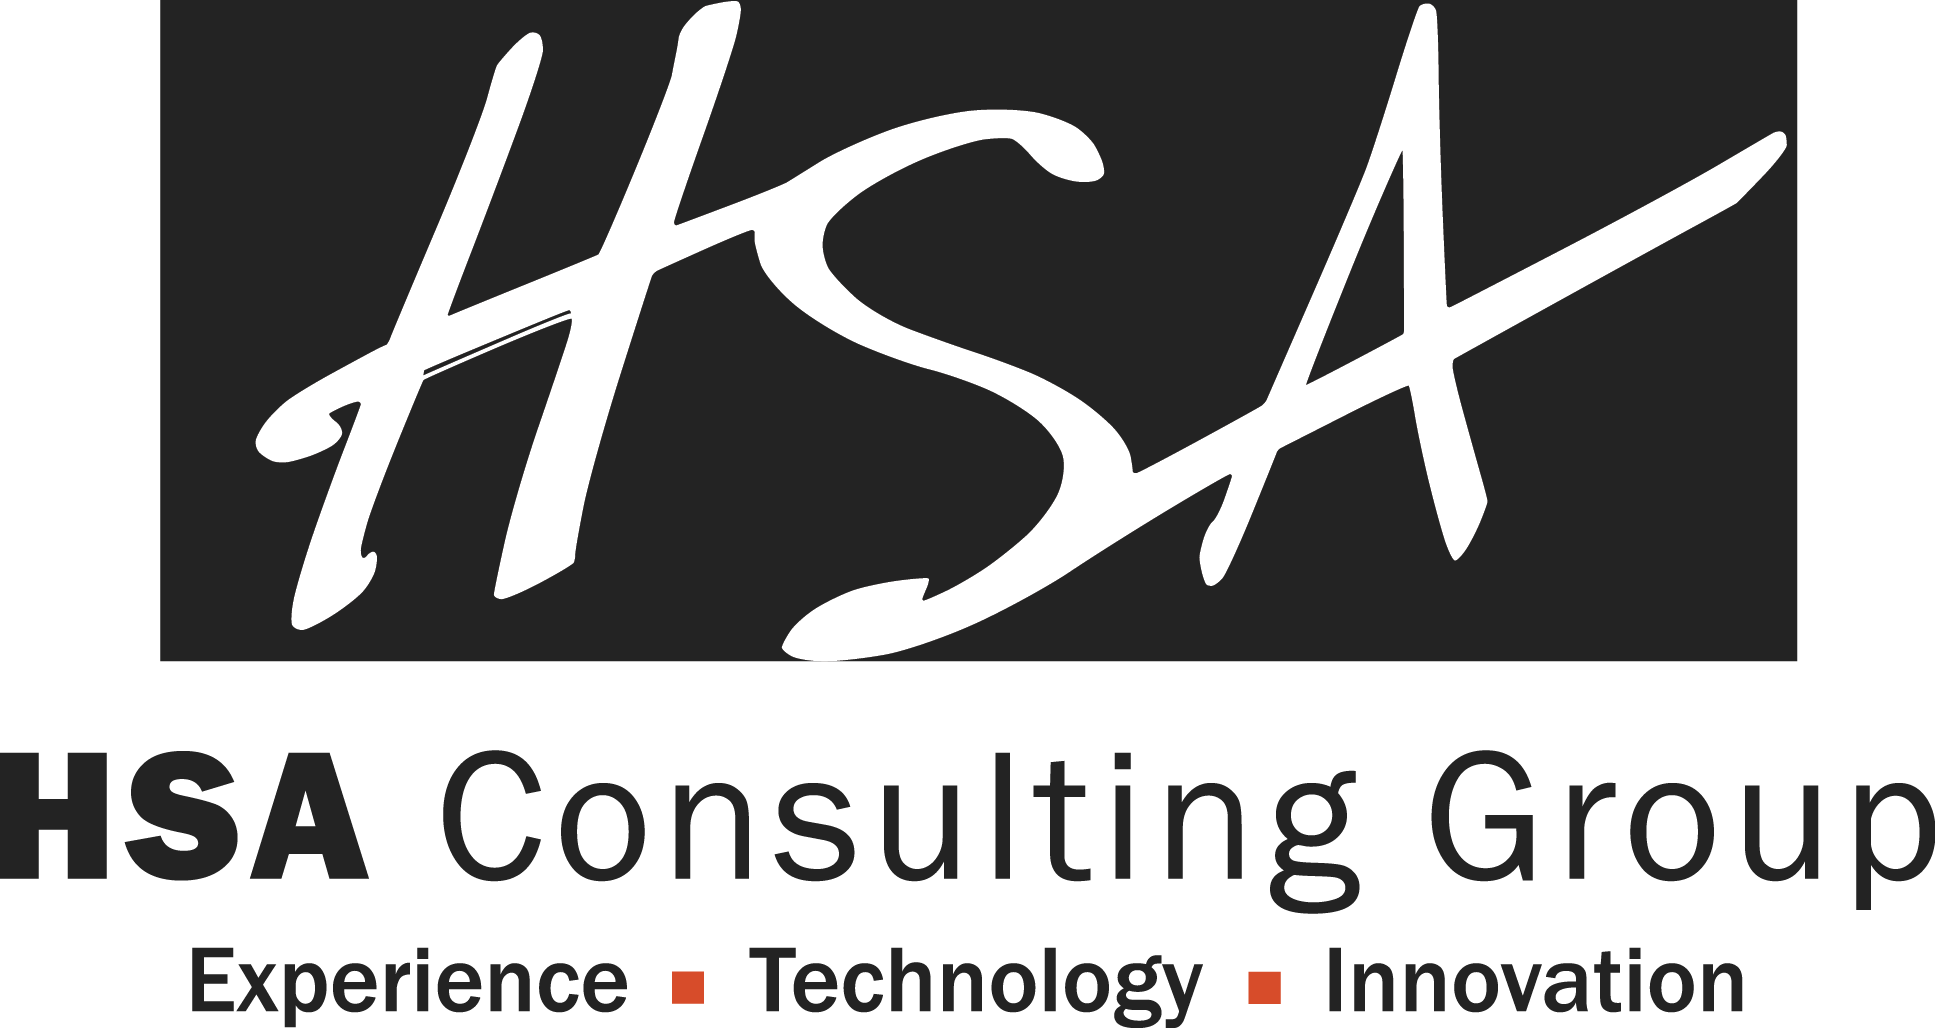 HSA Logo - HSA Consulting Group, Inc. | Experience - Technology - Innovation